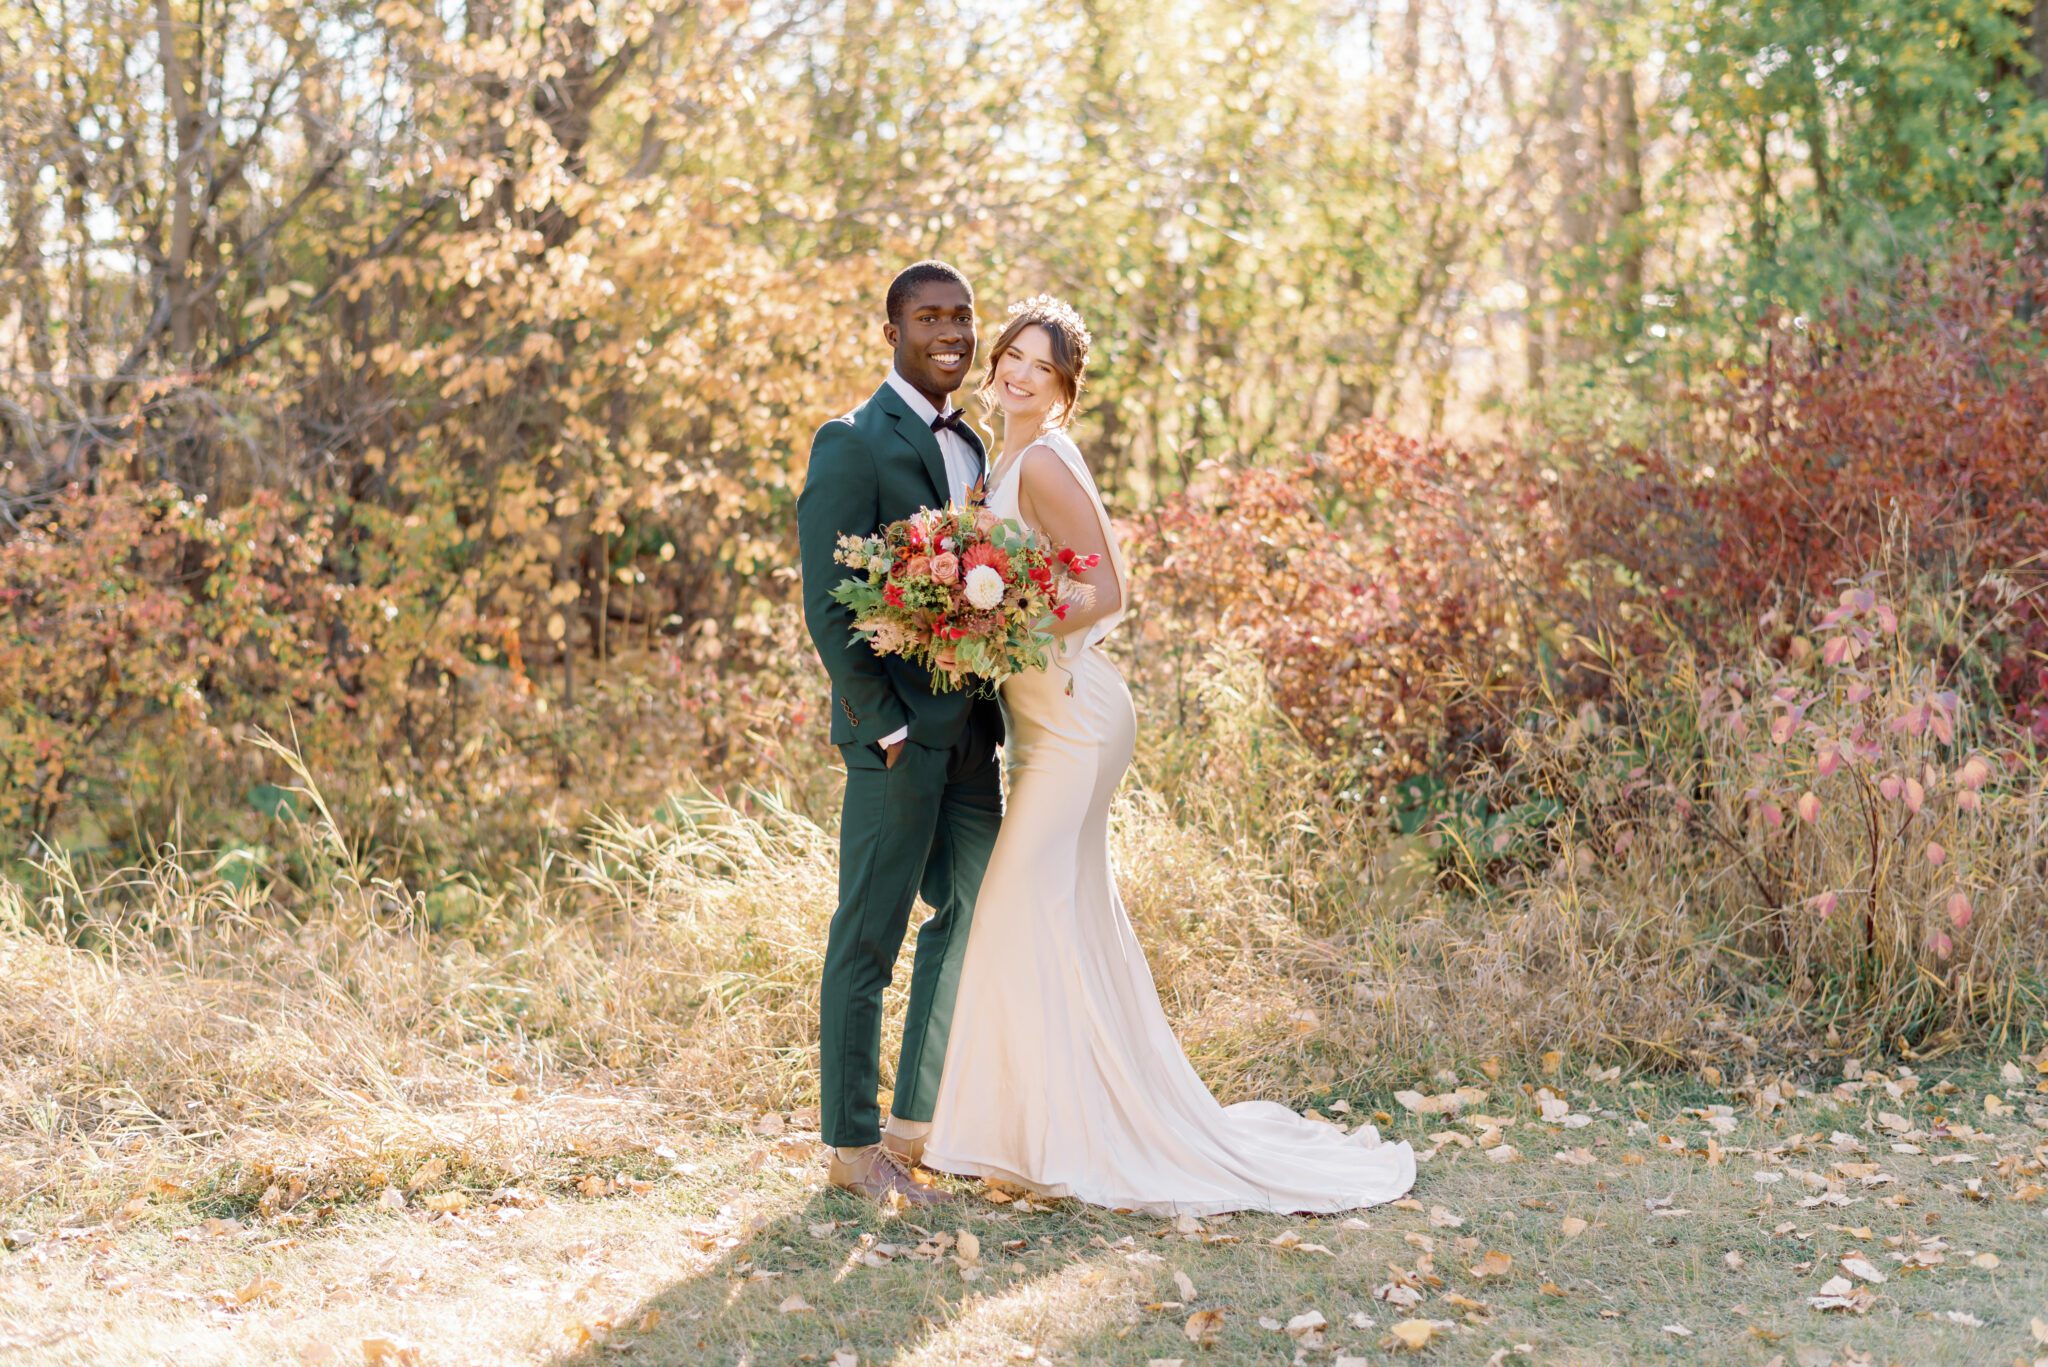 Couple embracing at intimate Fall wedding, groom wearing emerald green suit, and bride in elegant satin gown. Organic rich fall florals by Petal and Stem.